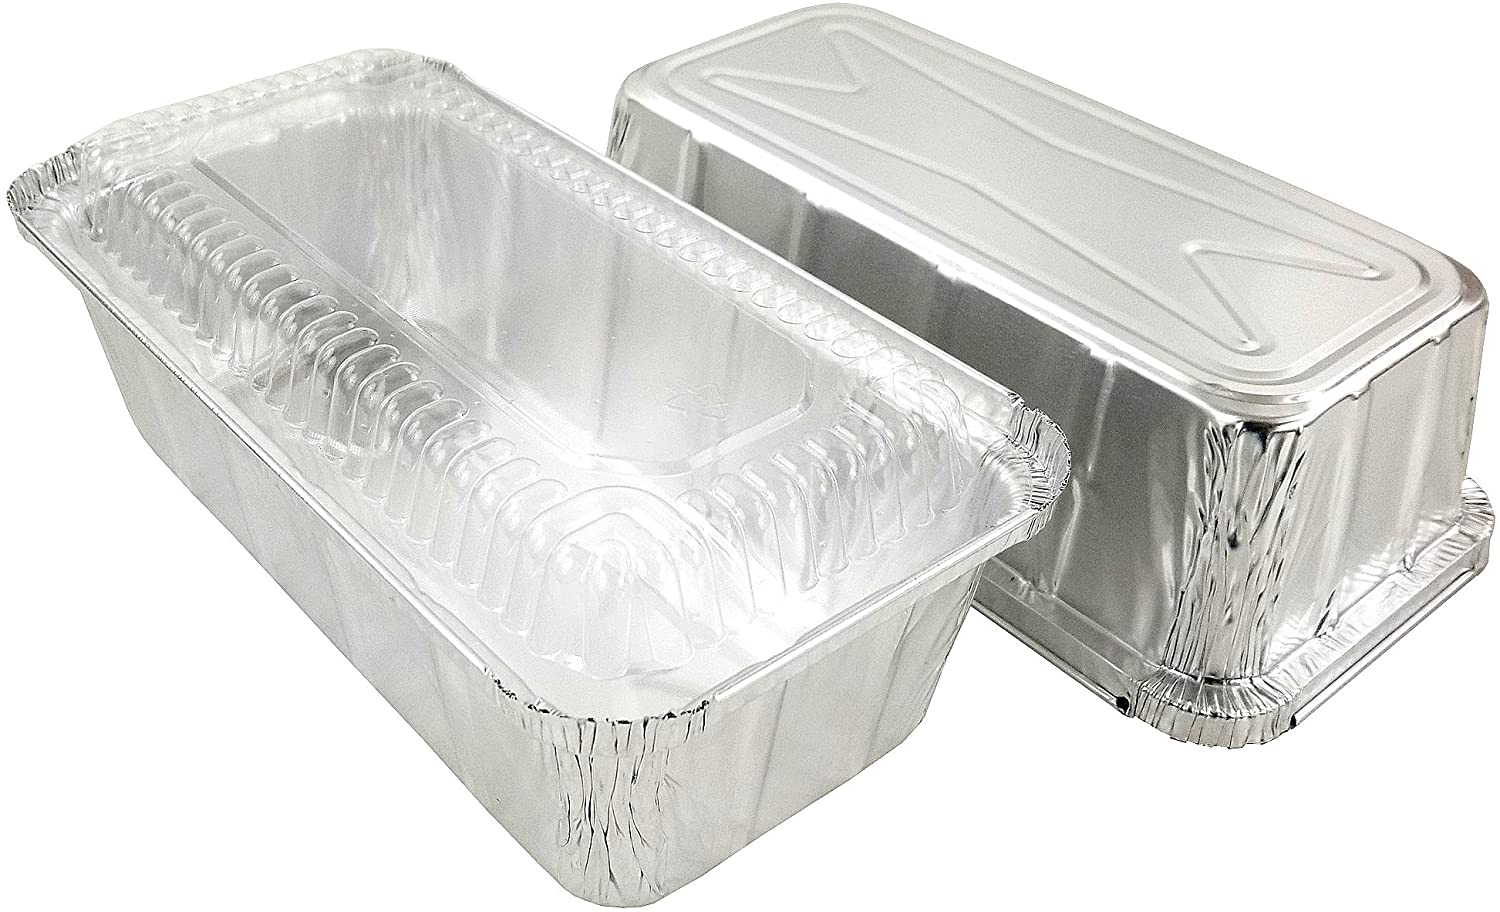 Beasea 25 Pack 4.7x3.6 Inch Mini Loaf Pans Aluminum Foil Bread Pans Bread Loaf Pans Mini Loaf Baking Pans Loaf Bakeware for Baking Disposable Loaf Pan with Lid